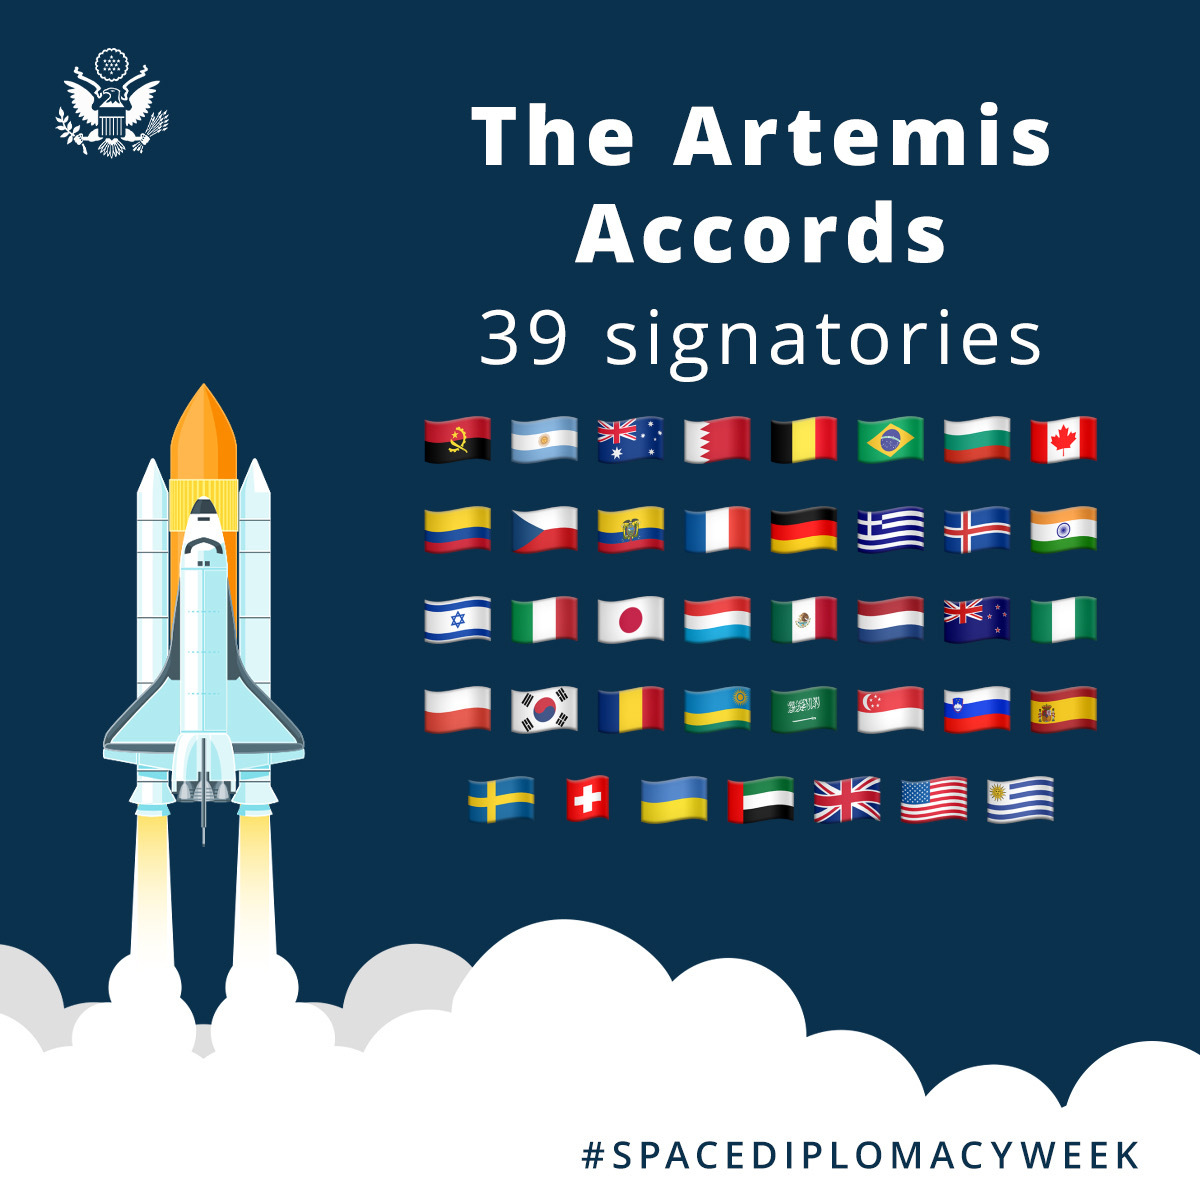 Led by @NASA and the State Department, the Artemis Accords advance safe, peaceful, and transparent civil space exploration cooperation. #SpaceDiplomacyWeek Learn more at nasa.gov/artemis-accord….